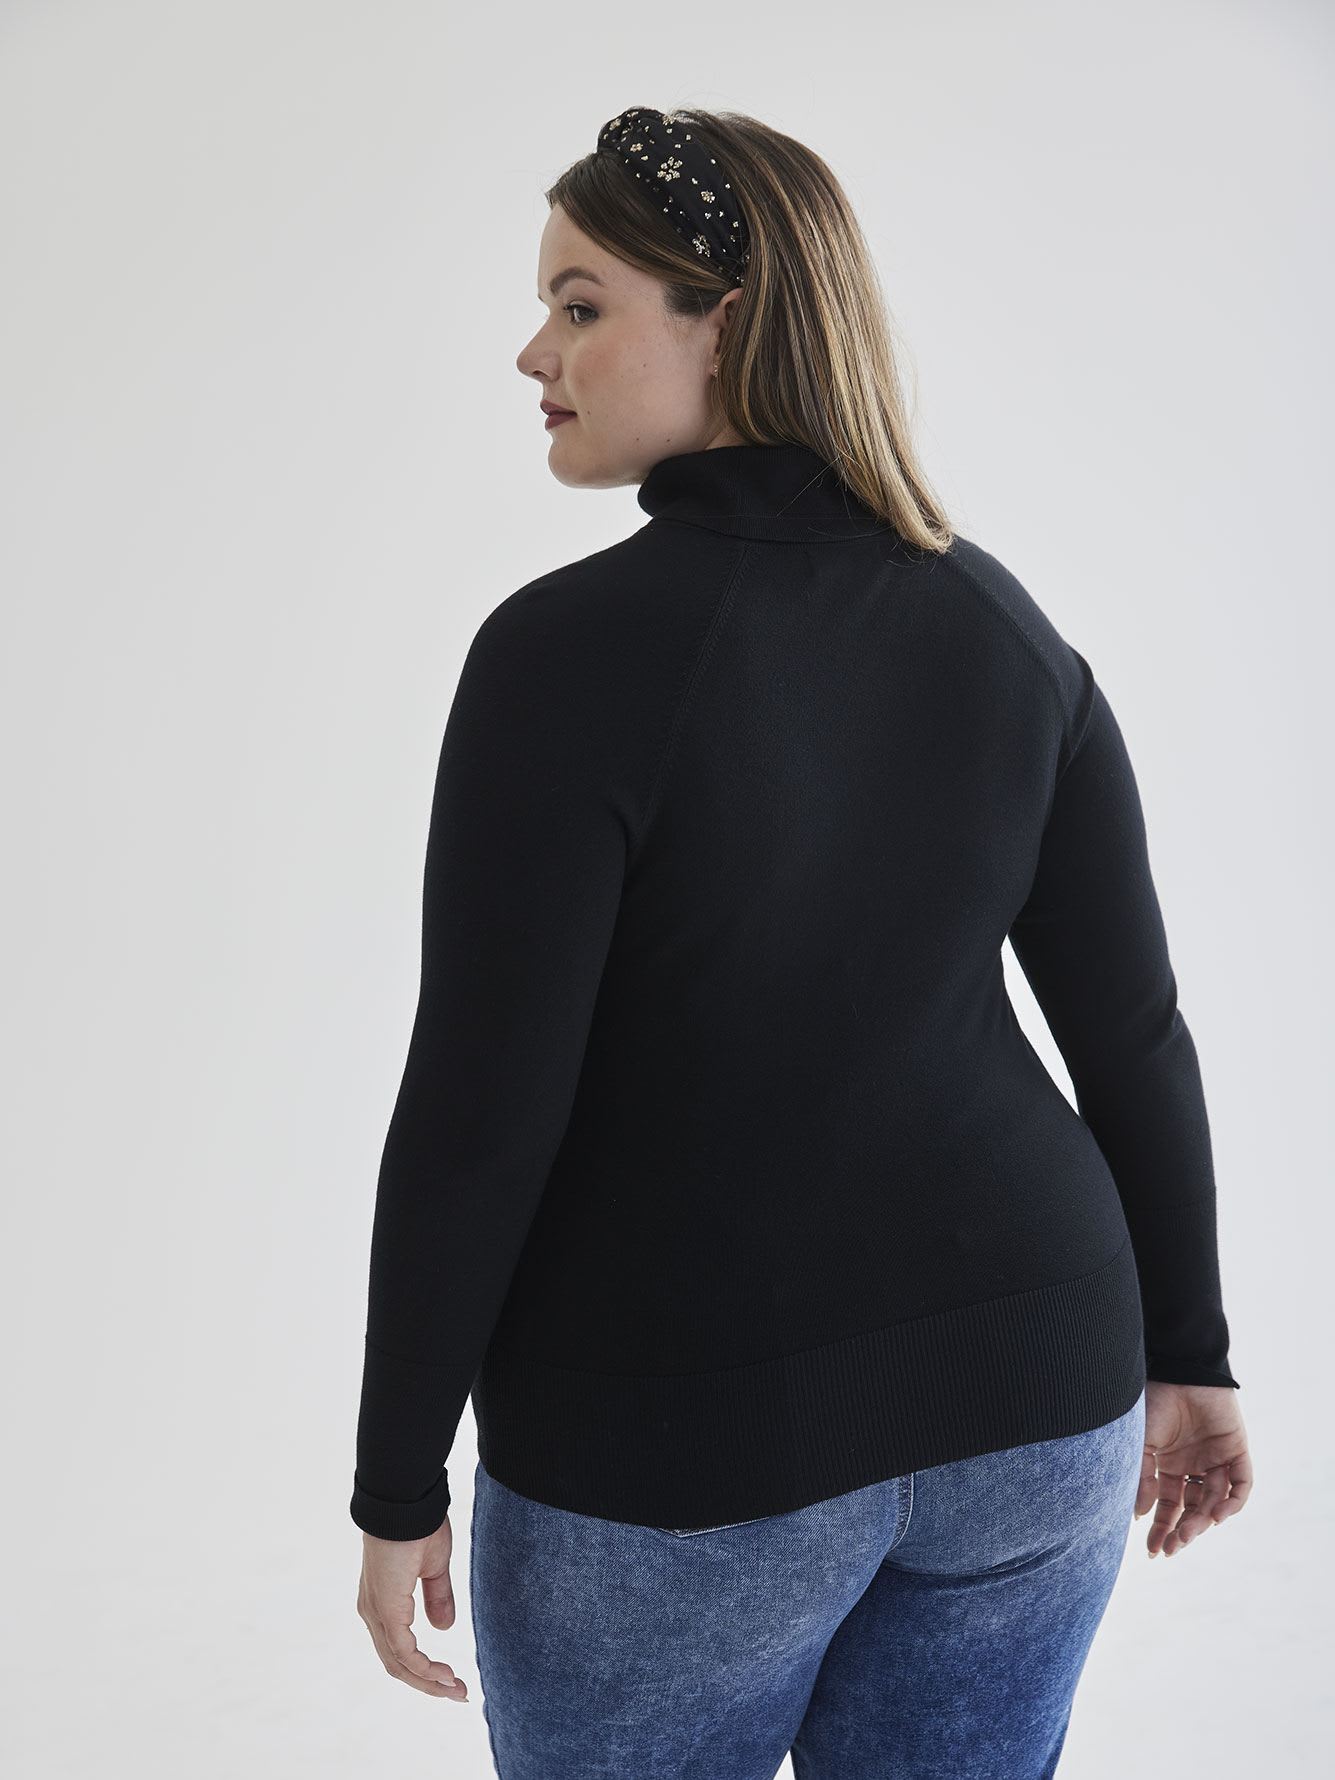 Turtle Neck Sweater with Sweetheart Cutout Neckline - Addition Elle